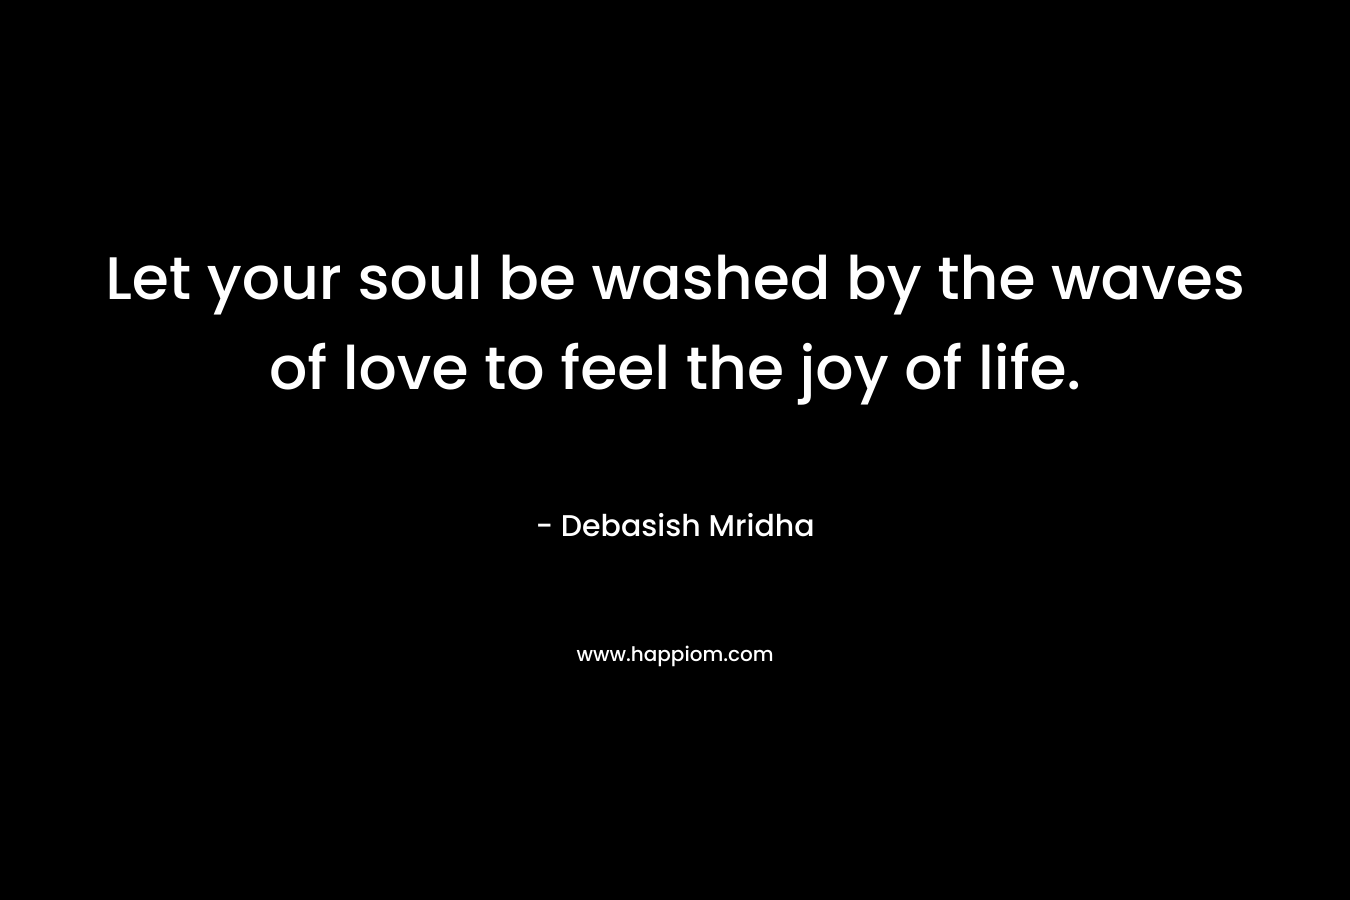 Let your soul be washed by the waves of love to feel the joy of life.